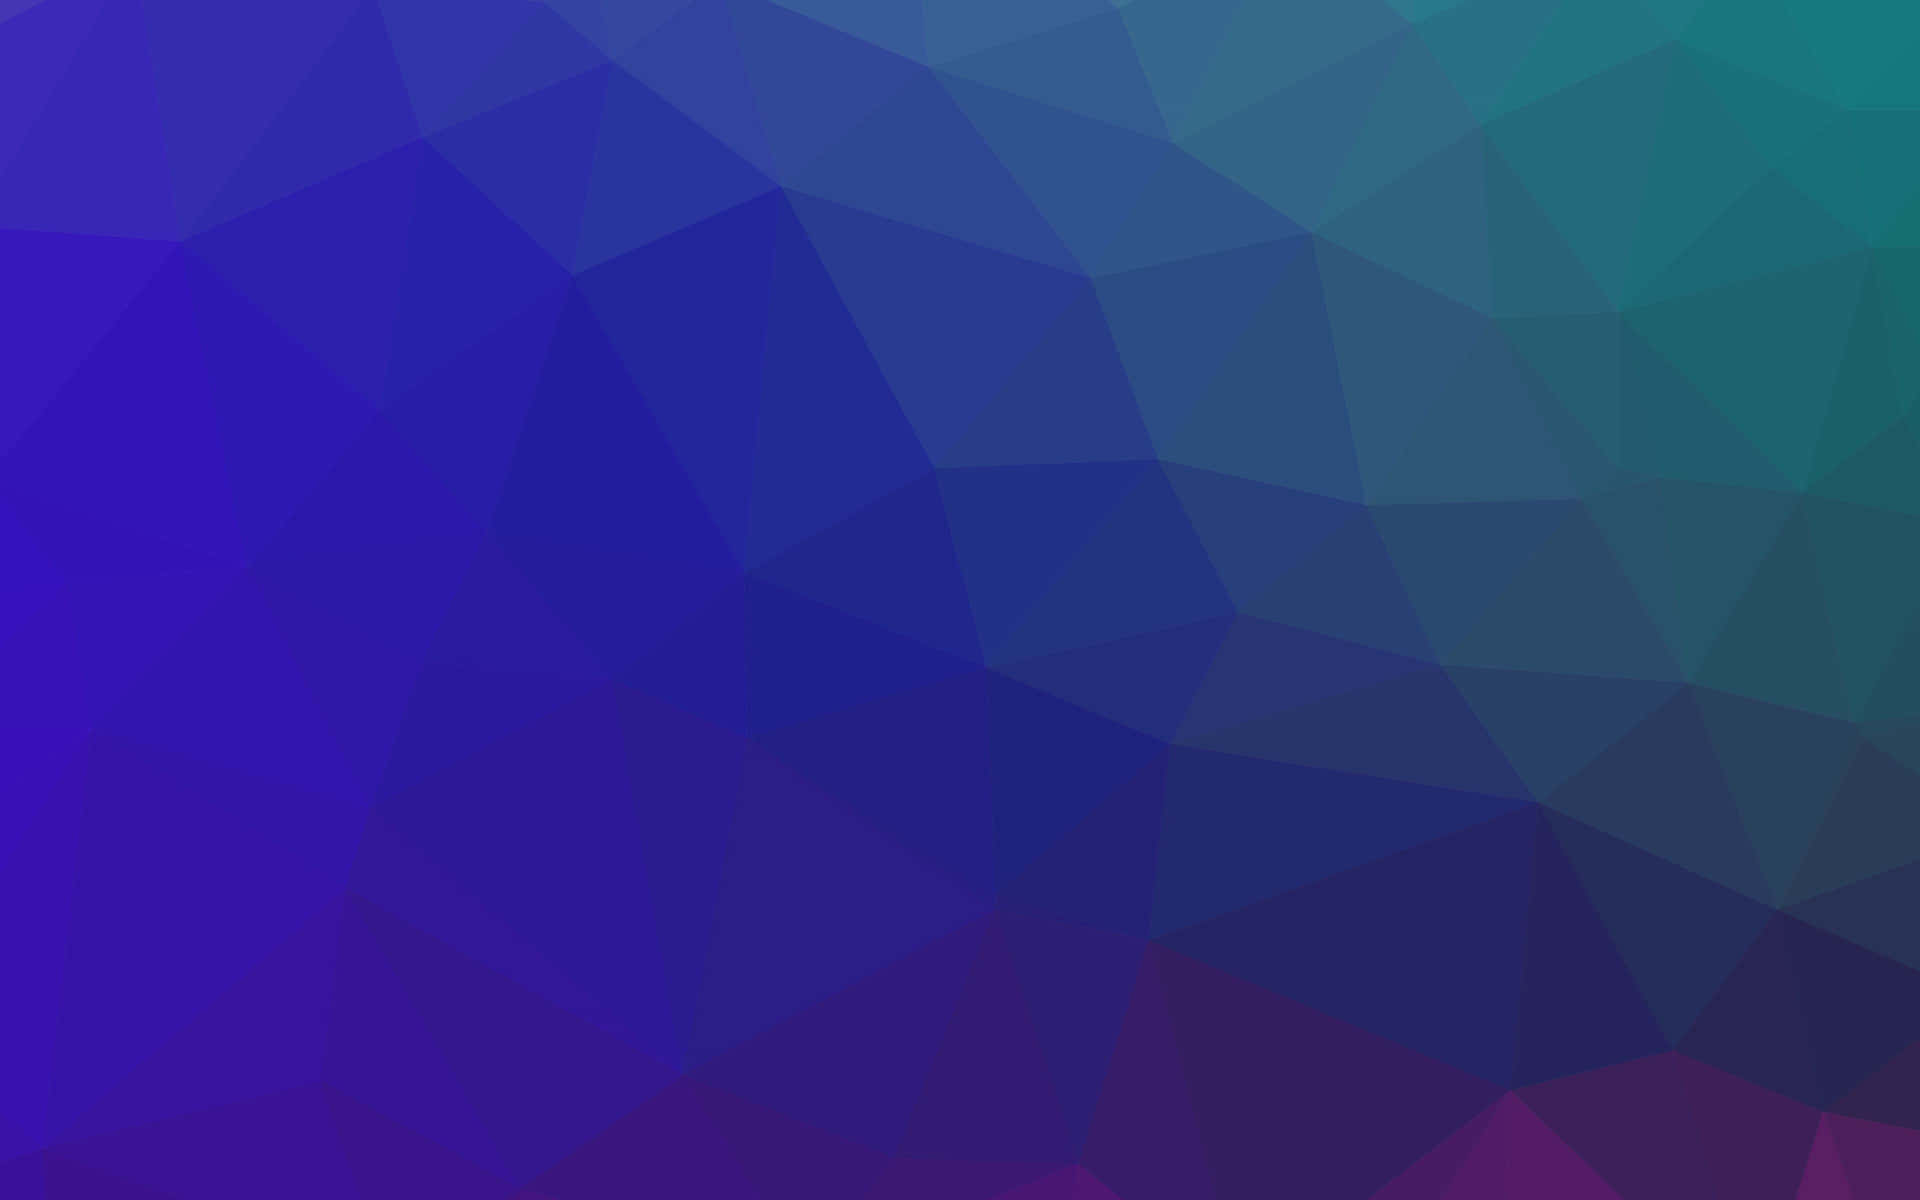 A beautiful abstract background with a blend of deep blue and vibrant purple shades